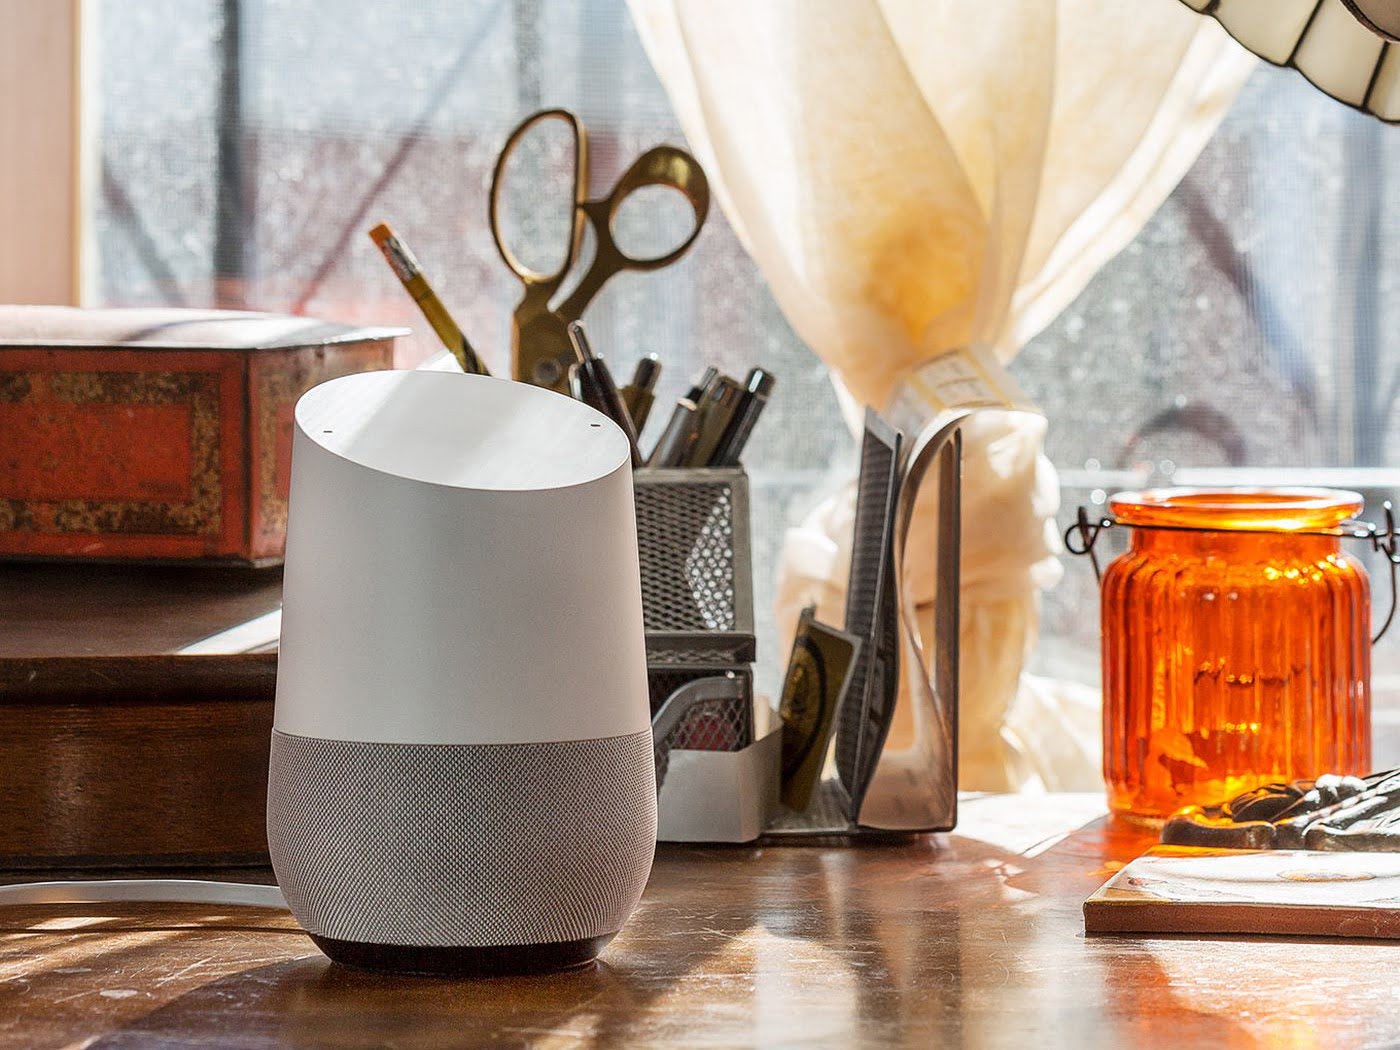 How Do I Connect My Google Home To Wi-Fi